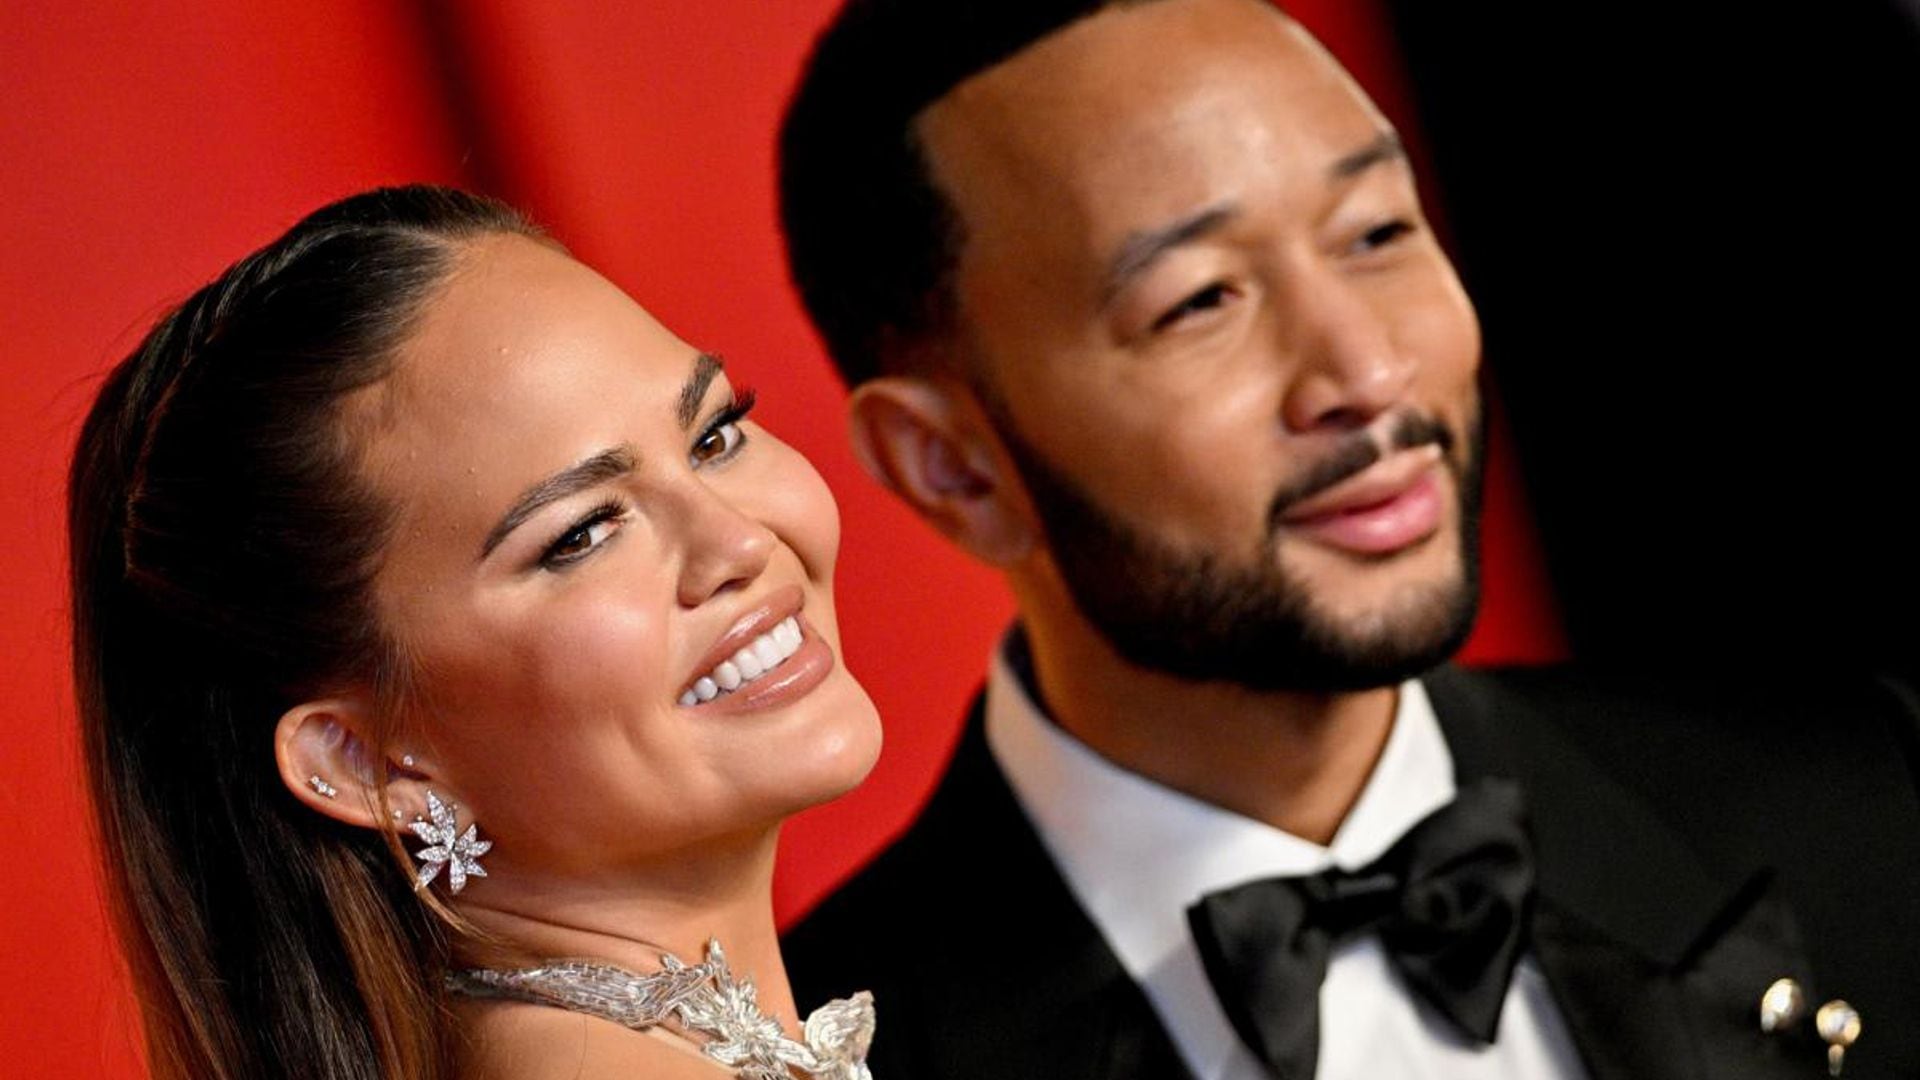 Chrissy Teigen and John Legend’s 9-month-old son Wren may be the cutest celebrity baby